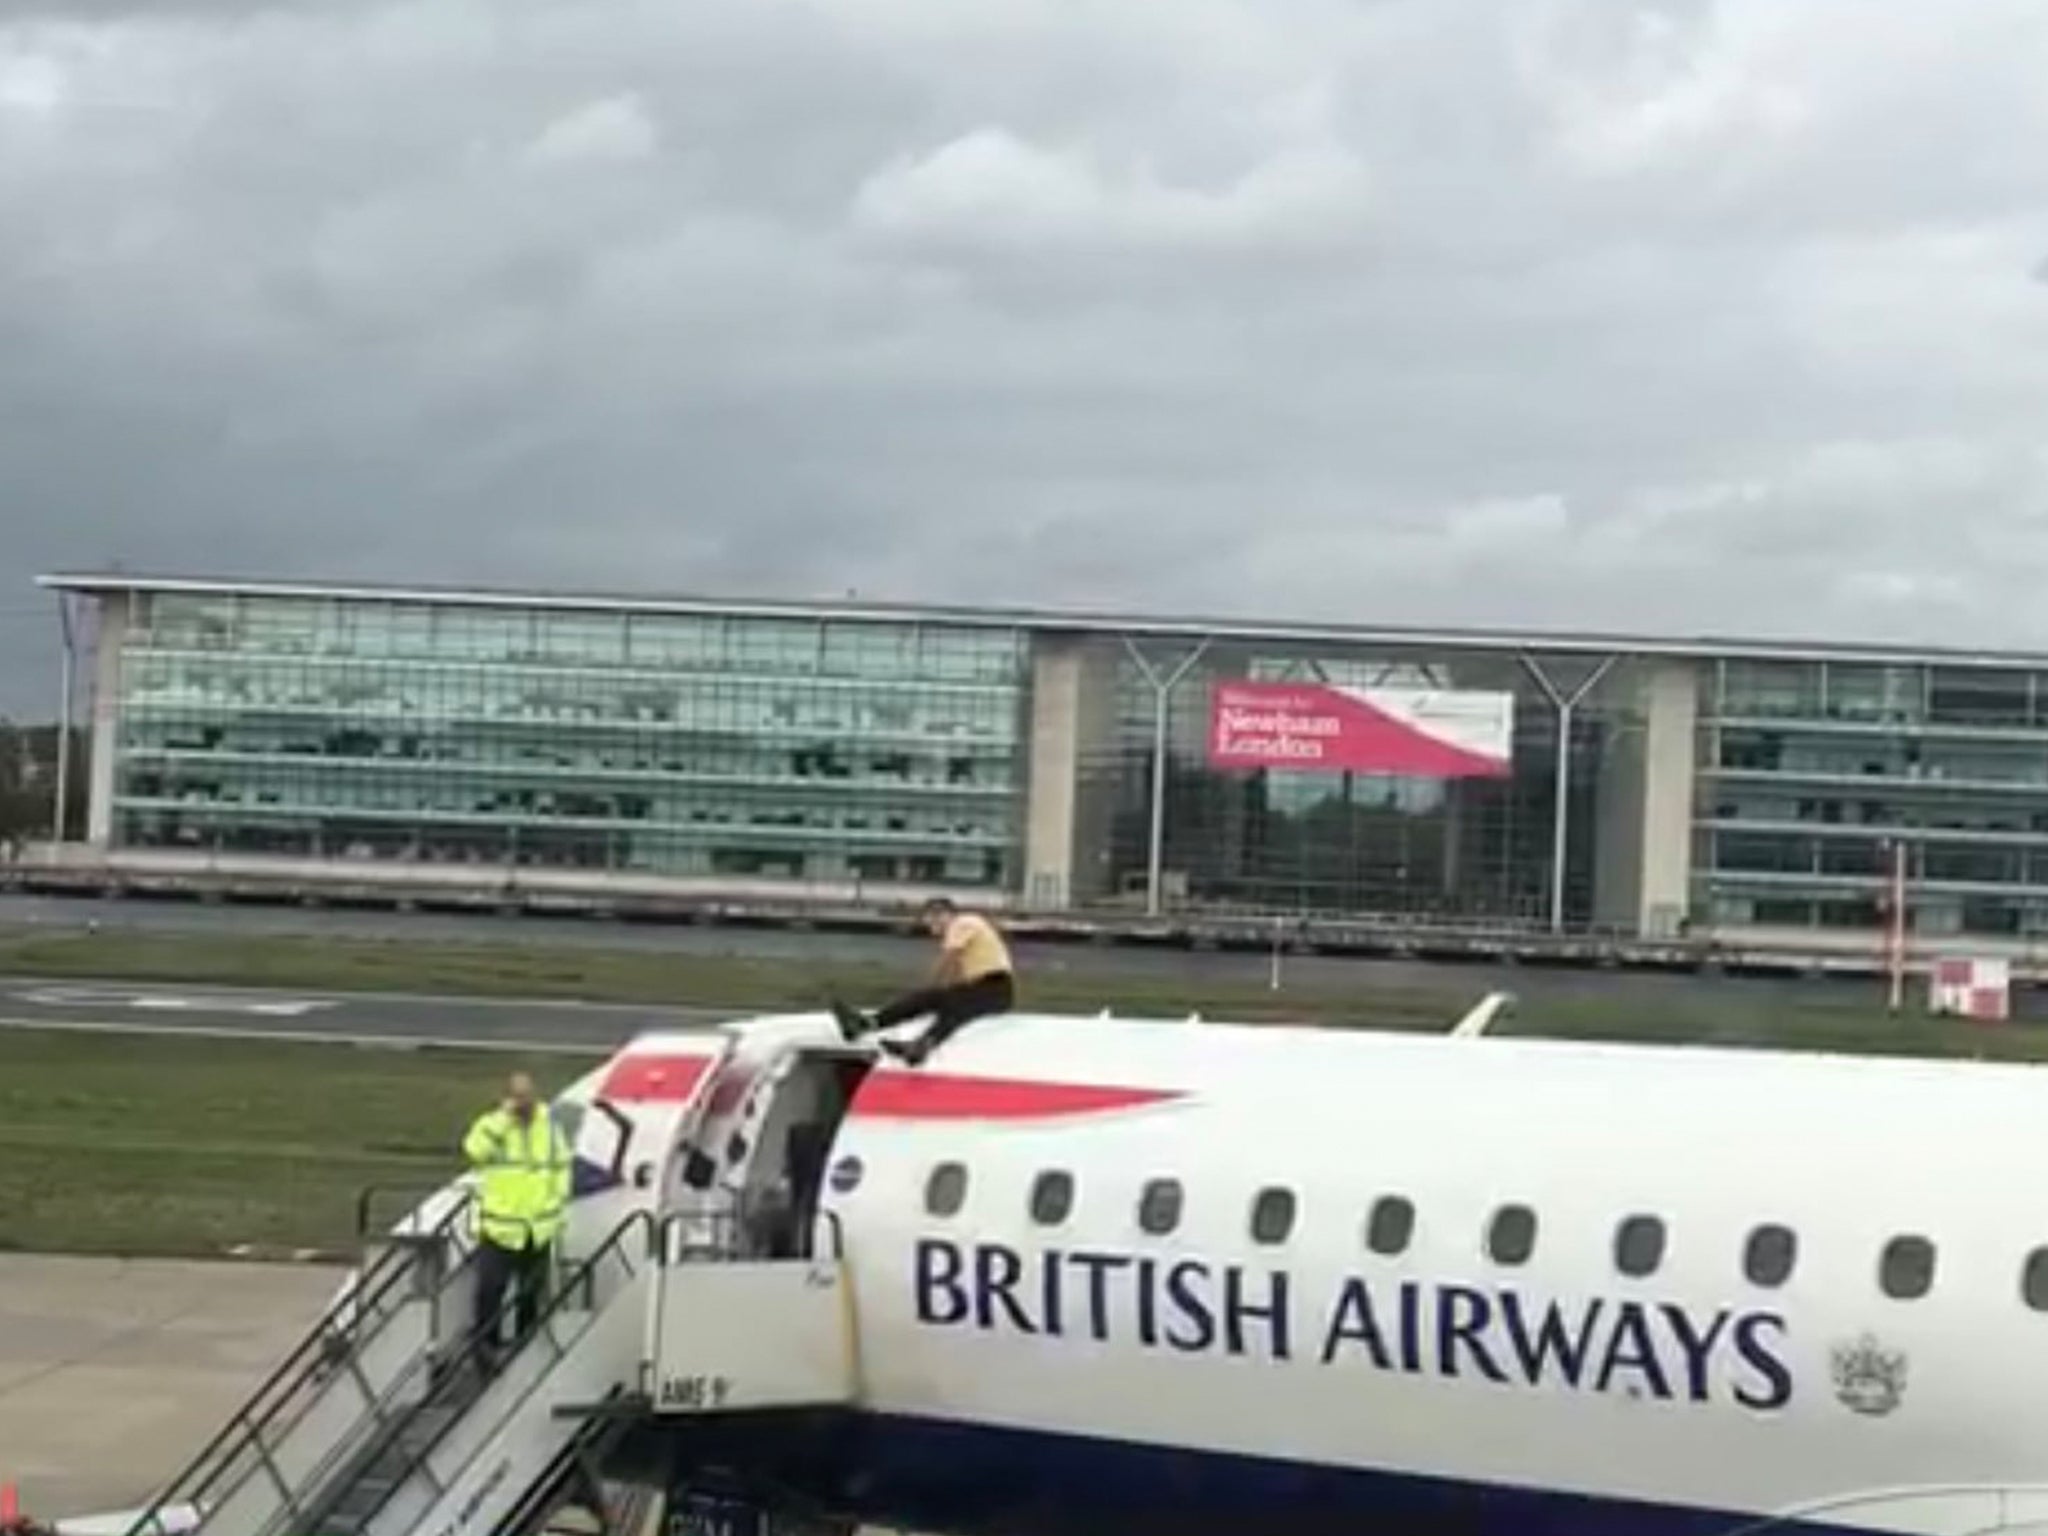 Extinction Rebellion protests: Man climbs on to British Airways plane before take-off as climate activists occupy airport